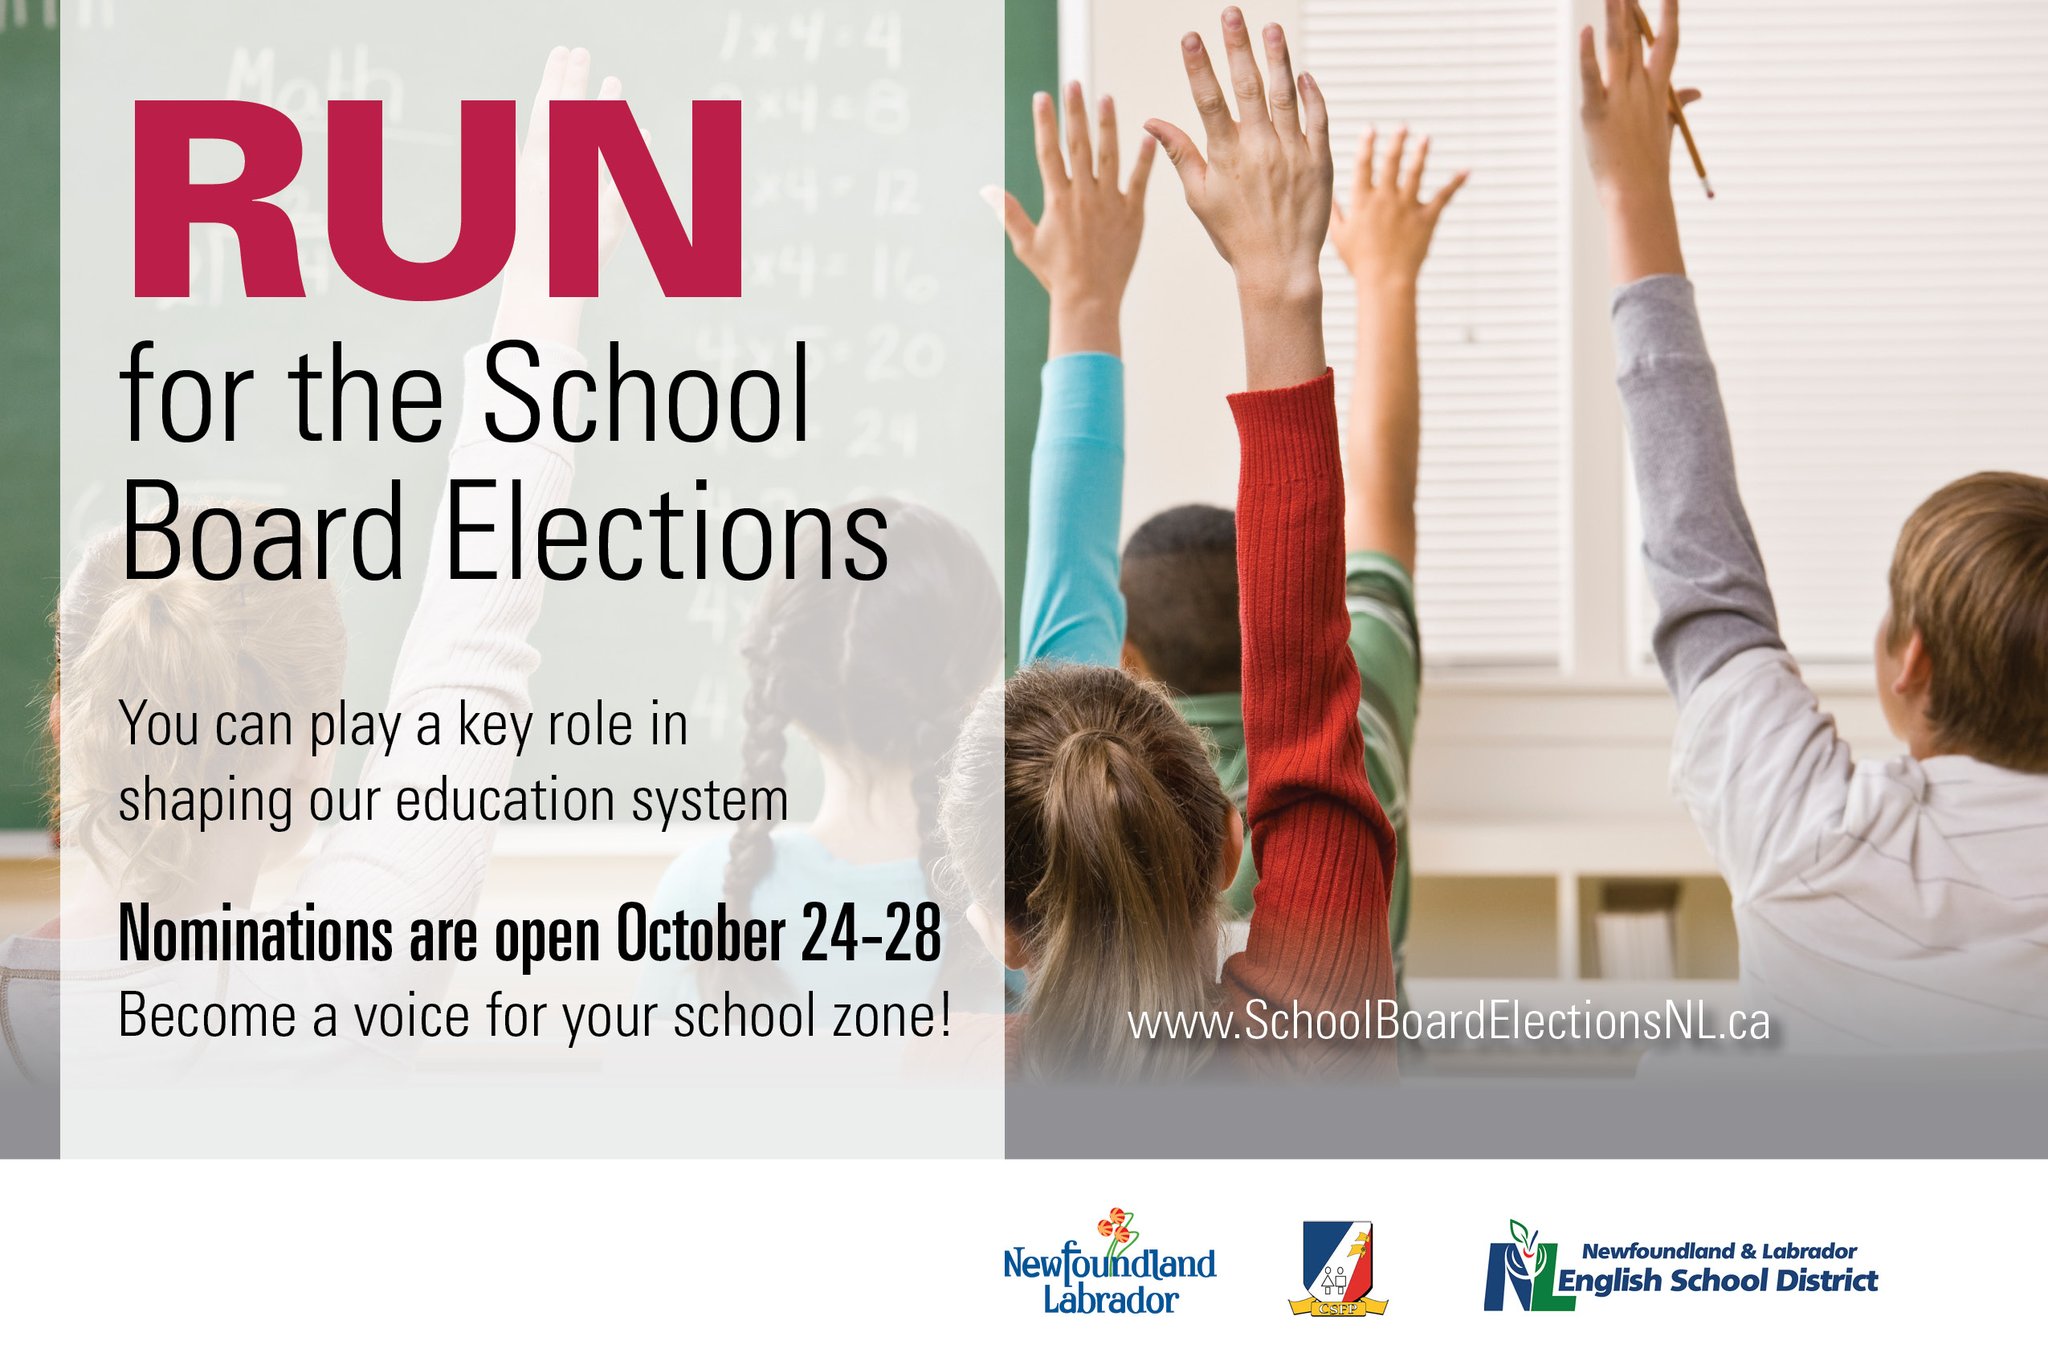 How do you get involved in school board elections?